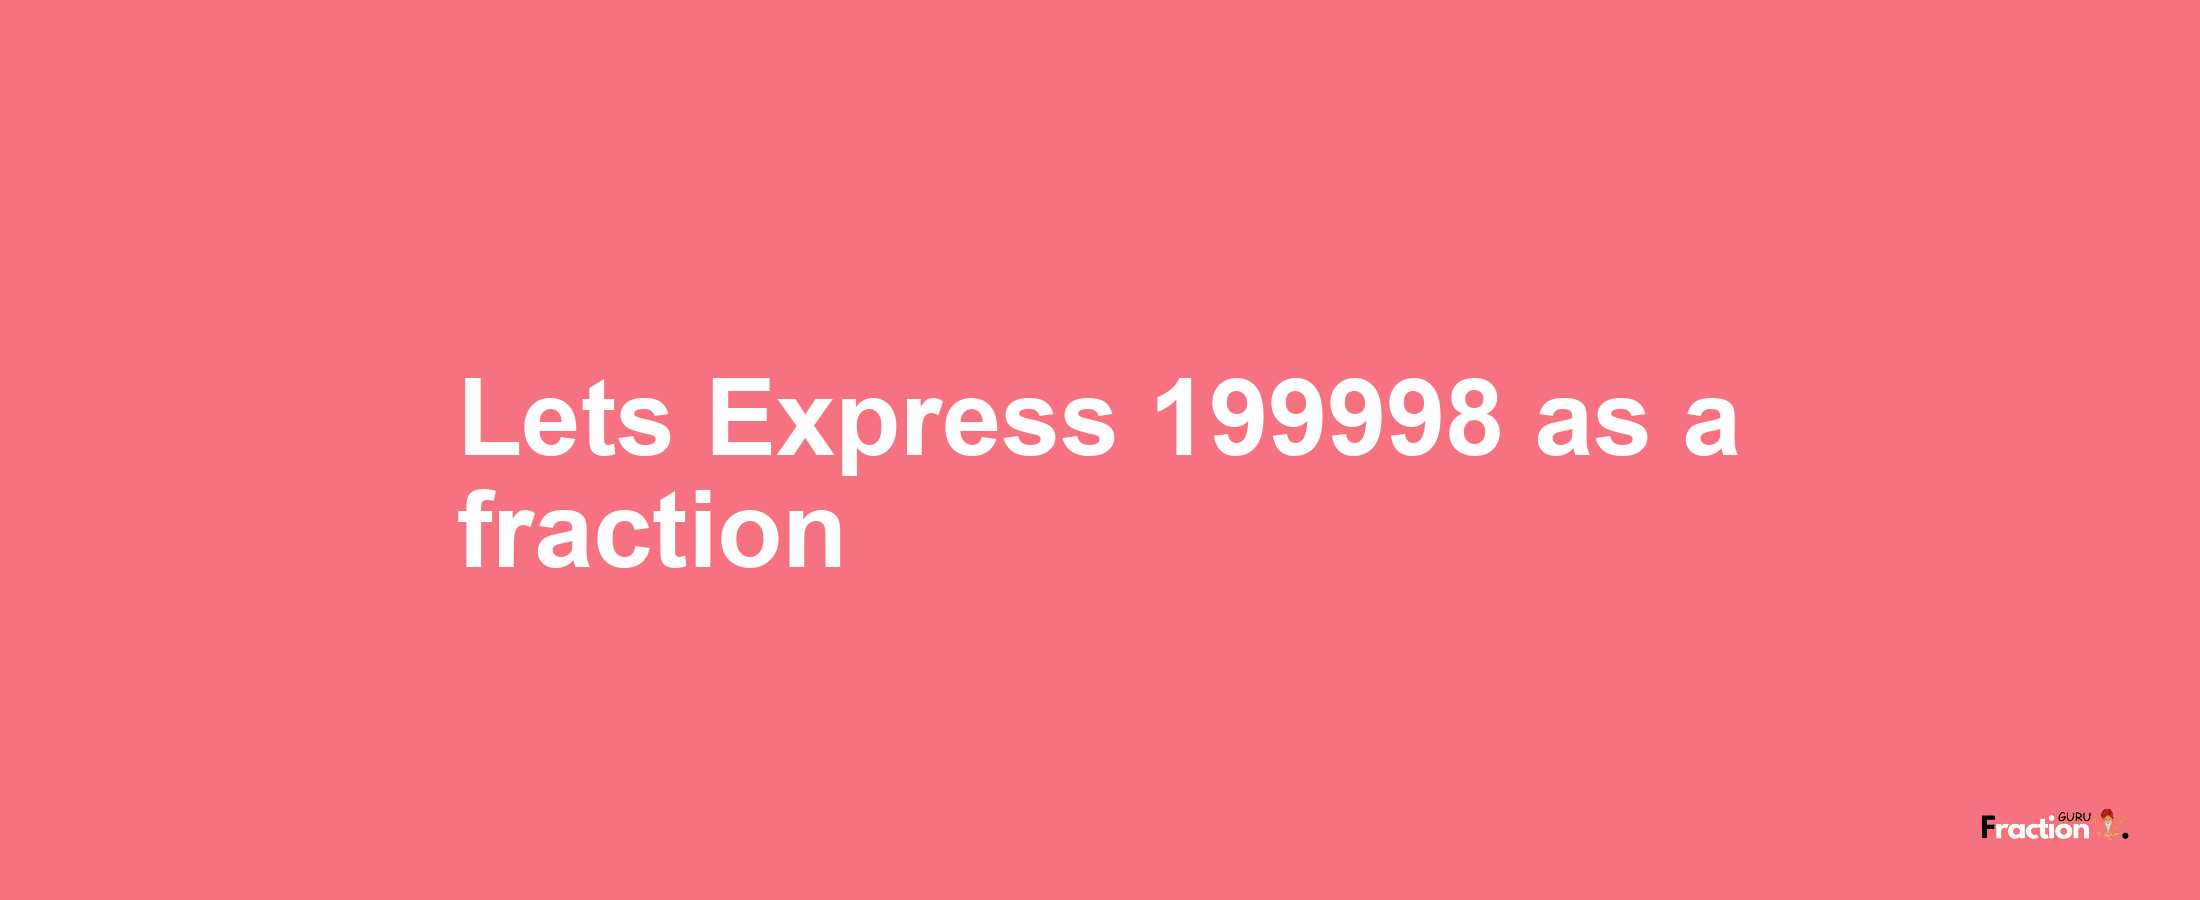 Lets Express 199998 as afraction